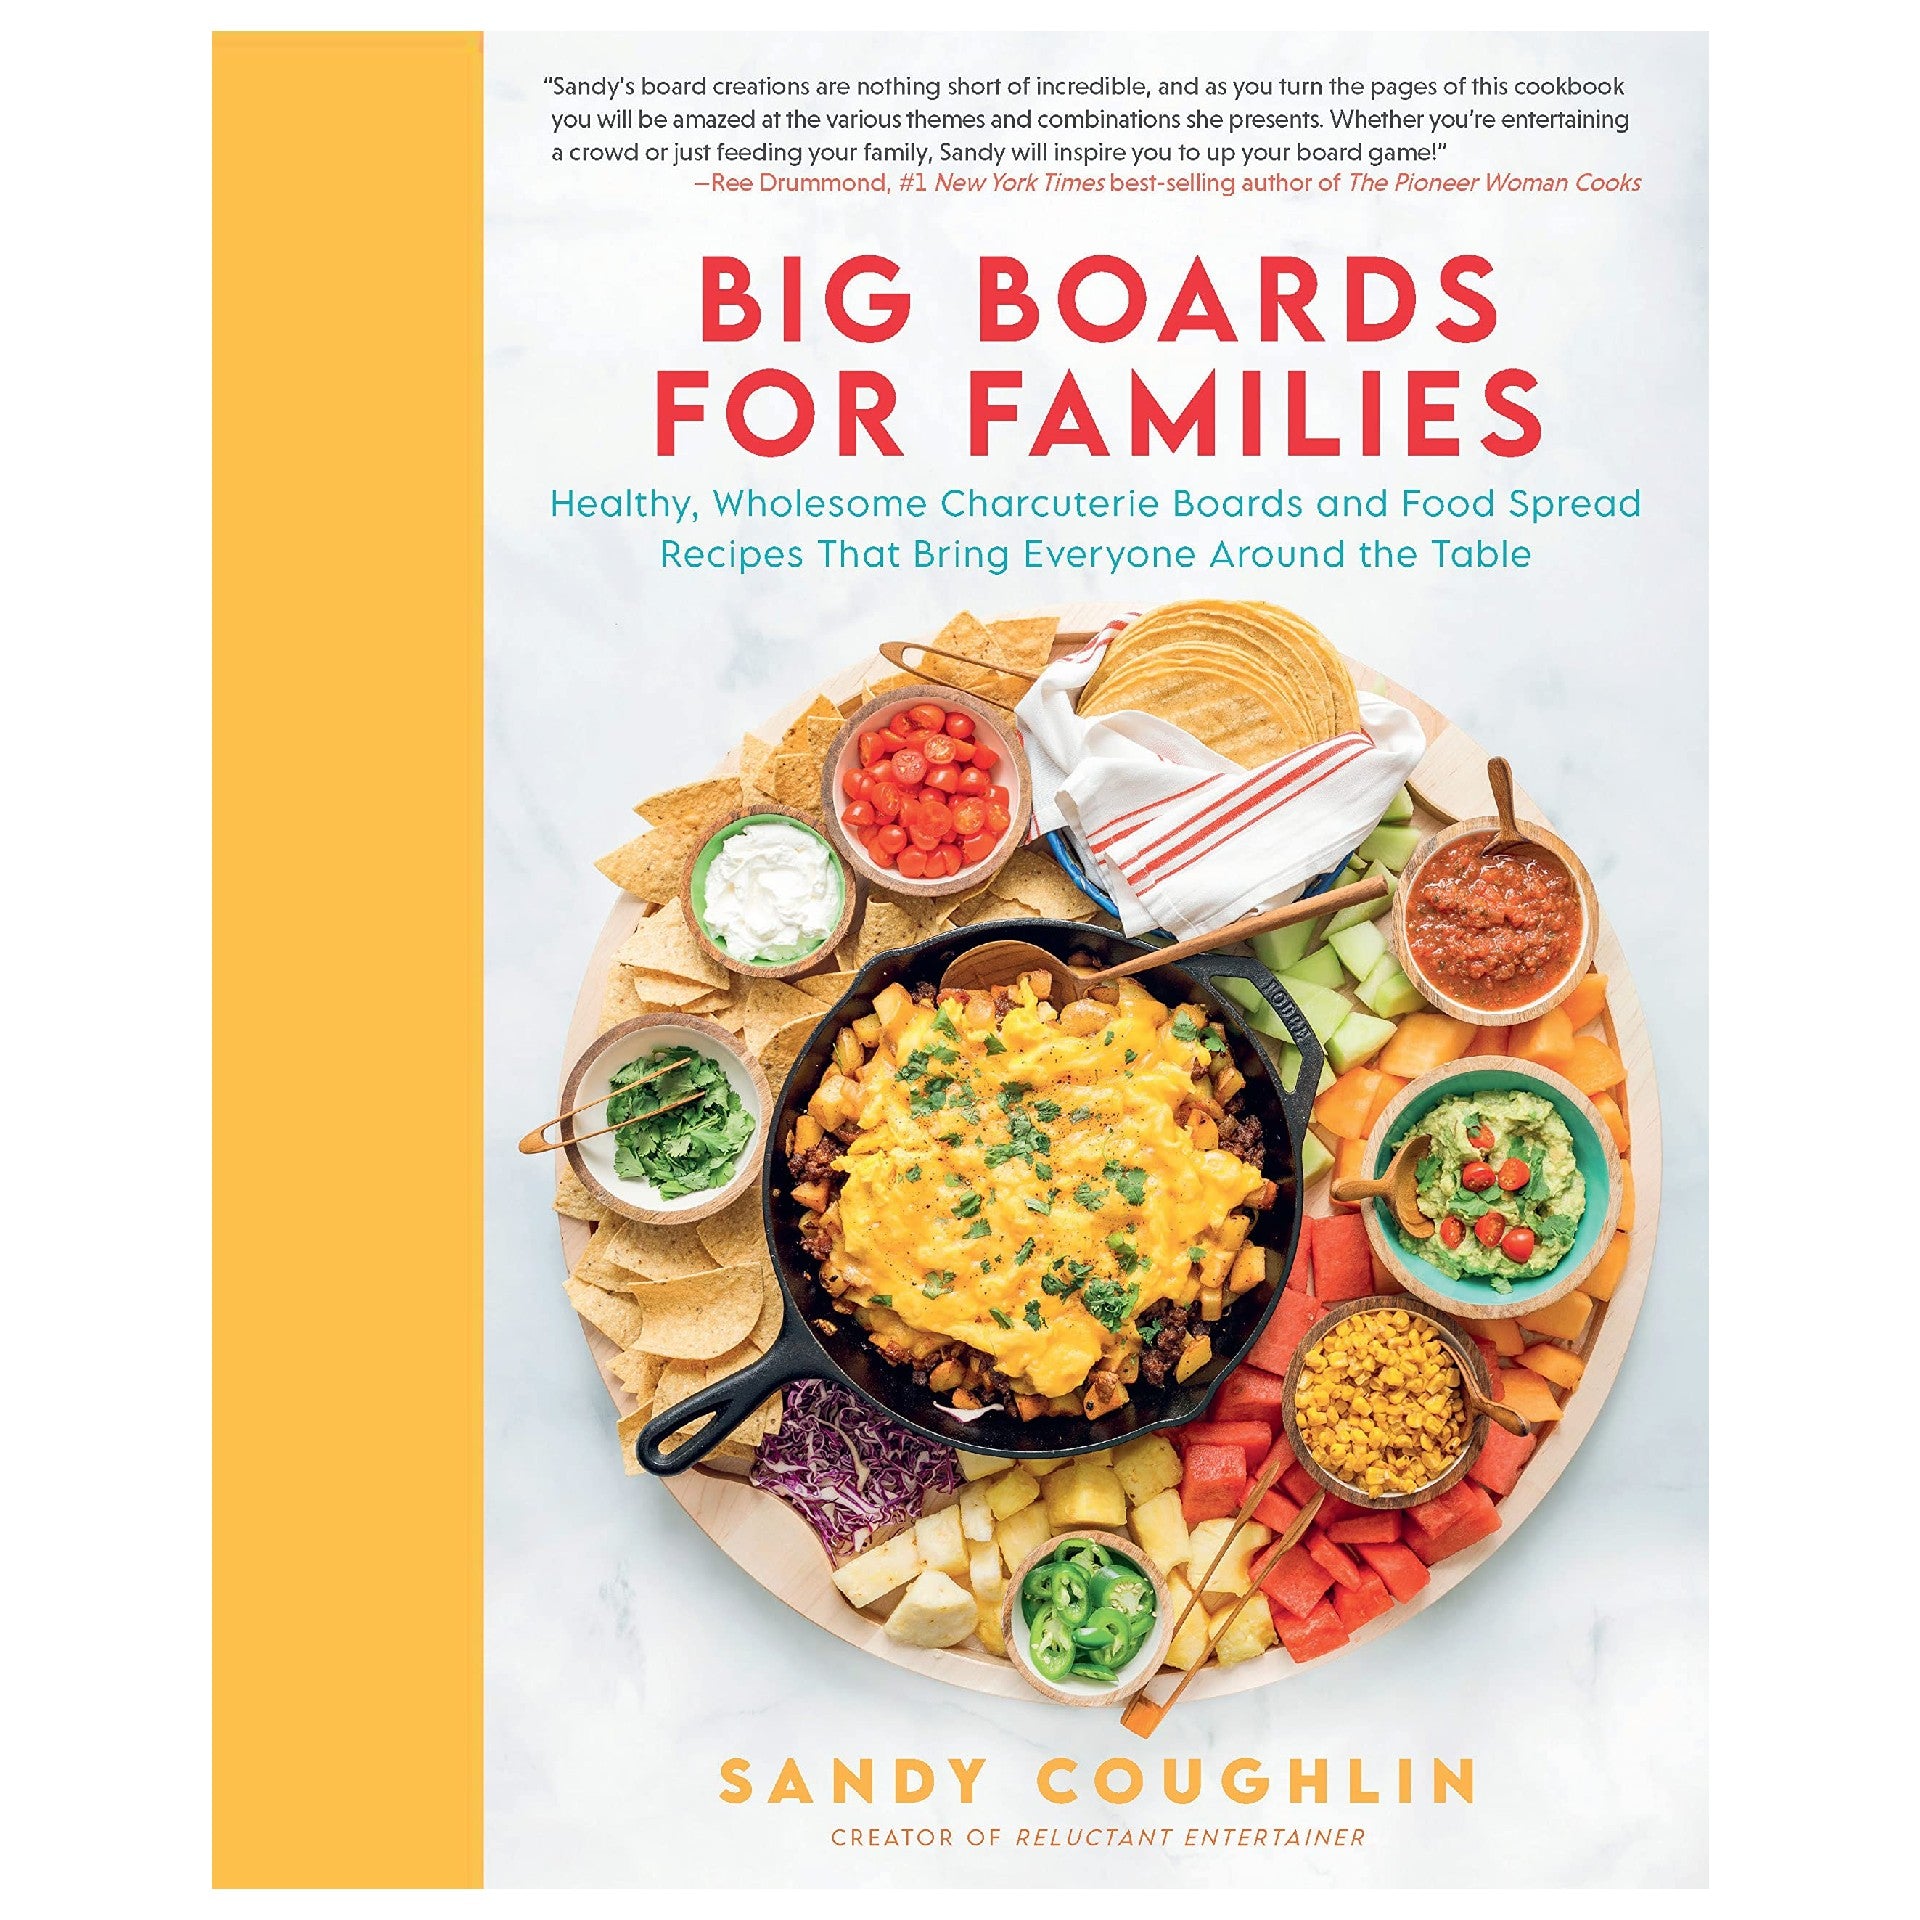 Big Boards for Families